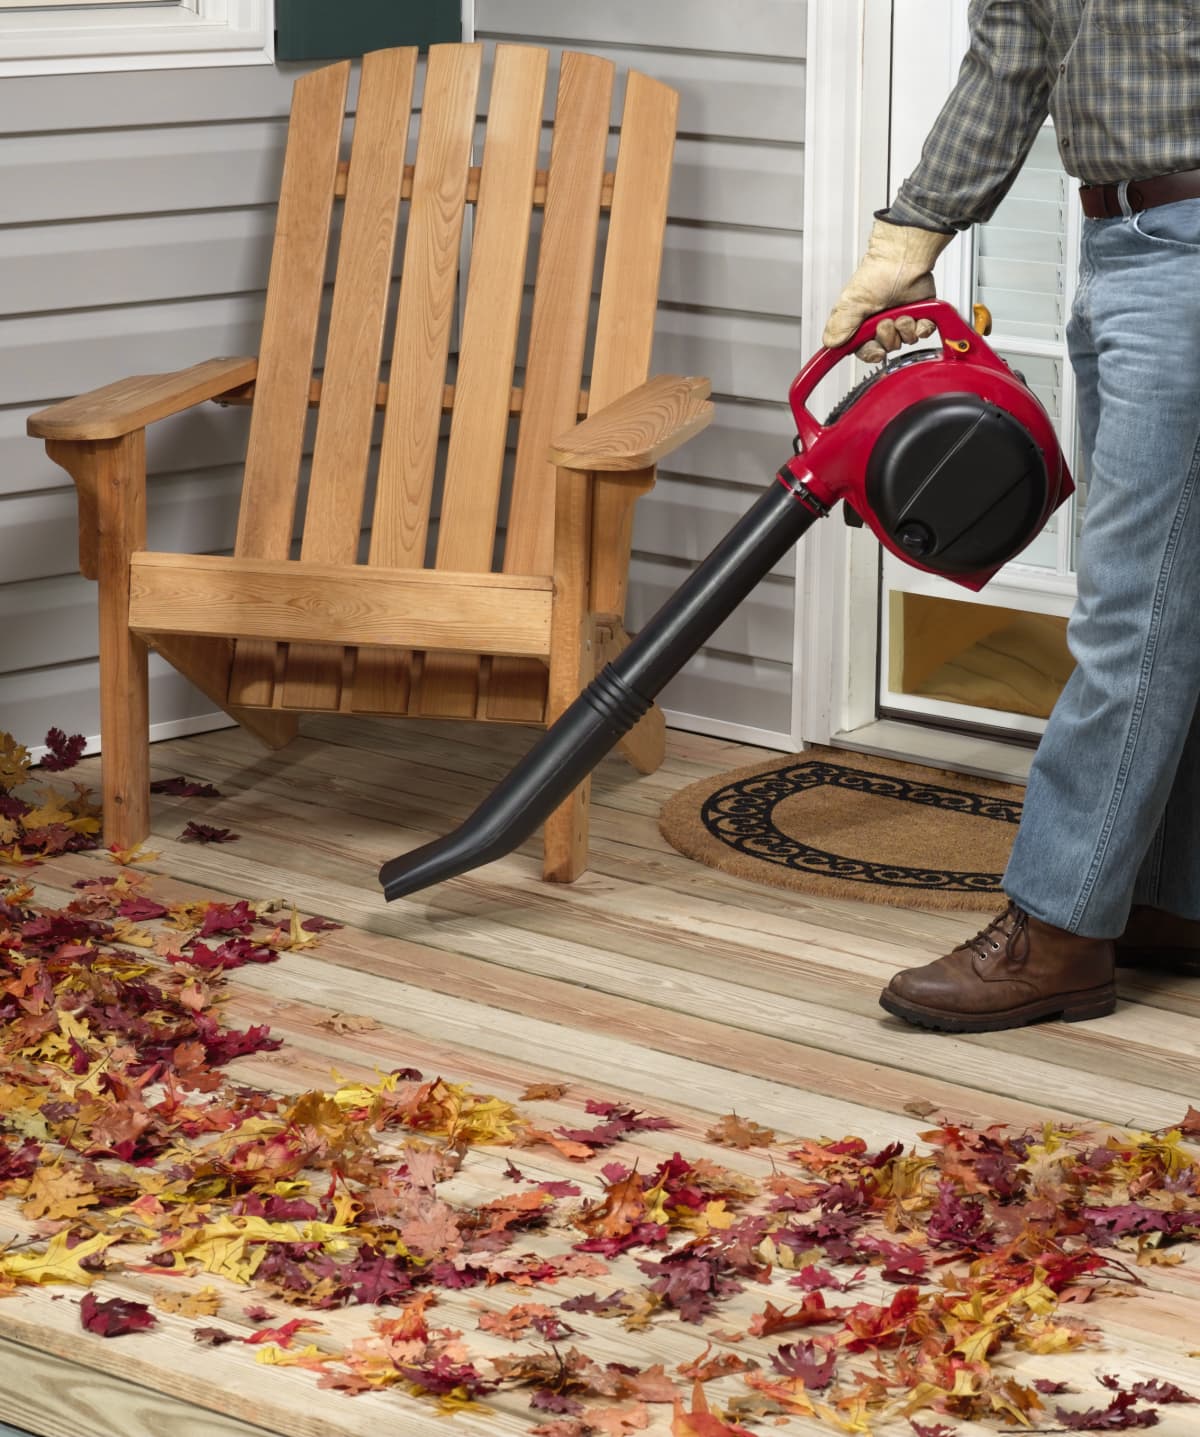 Leaf blower blowing leaves on a deck